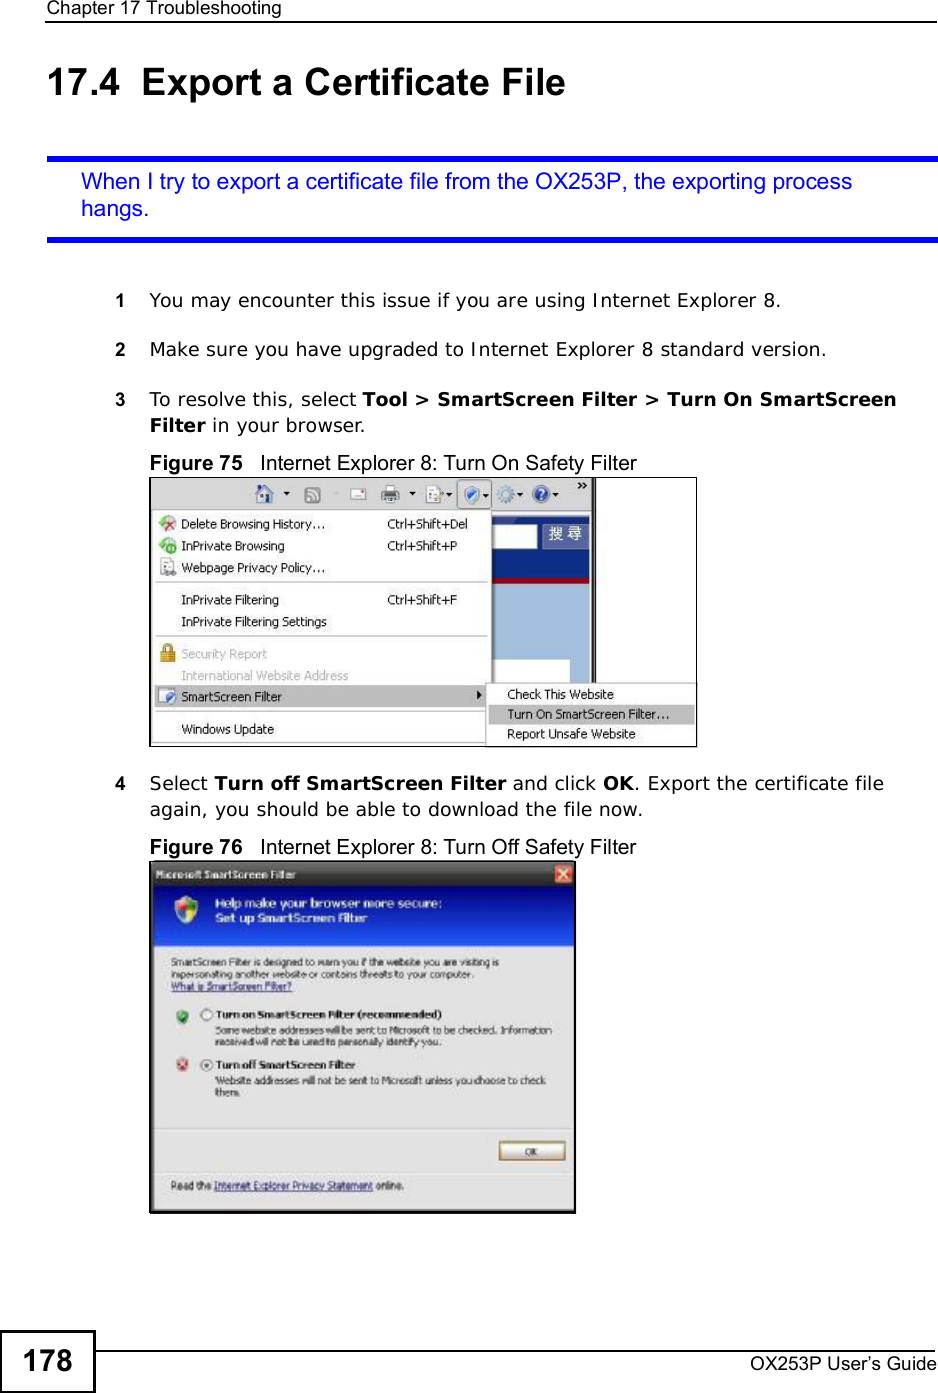 Chapter 17TroubleshootingOX253P User’s Guide17817.4  Export a Certificate FileWhen I try to export a certificate file from the OX253P, the exporting process hangs.1You may encounter this issue if you are using Internet Explorer 8.2Make sure you have upgraded to Internet Explorer 8 standard version.3To resolve this, select Tool &gt; SmartScreen Filter &gt; Turn On SmartScreen Filter in your browser.Figure 75   Internet Explorer 8: Turn On Safety Filter4Select Turn off SmartScreen Filter and click OK. Export the certificate file again, you should be able to download the file now.Figure 76   Internet Explorer 8: Turn Off Safety Filter